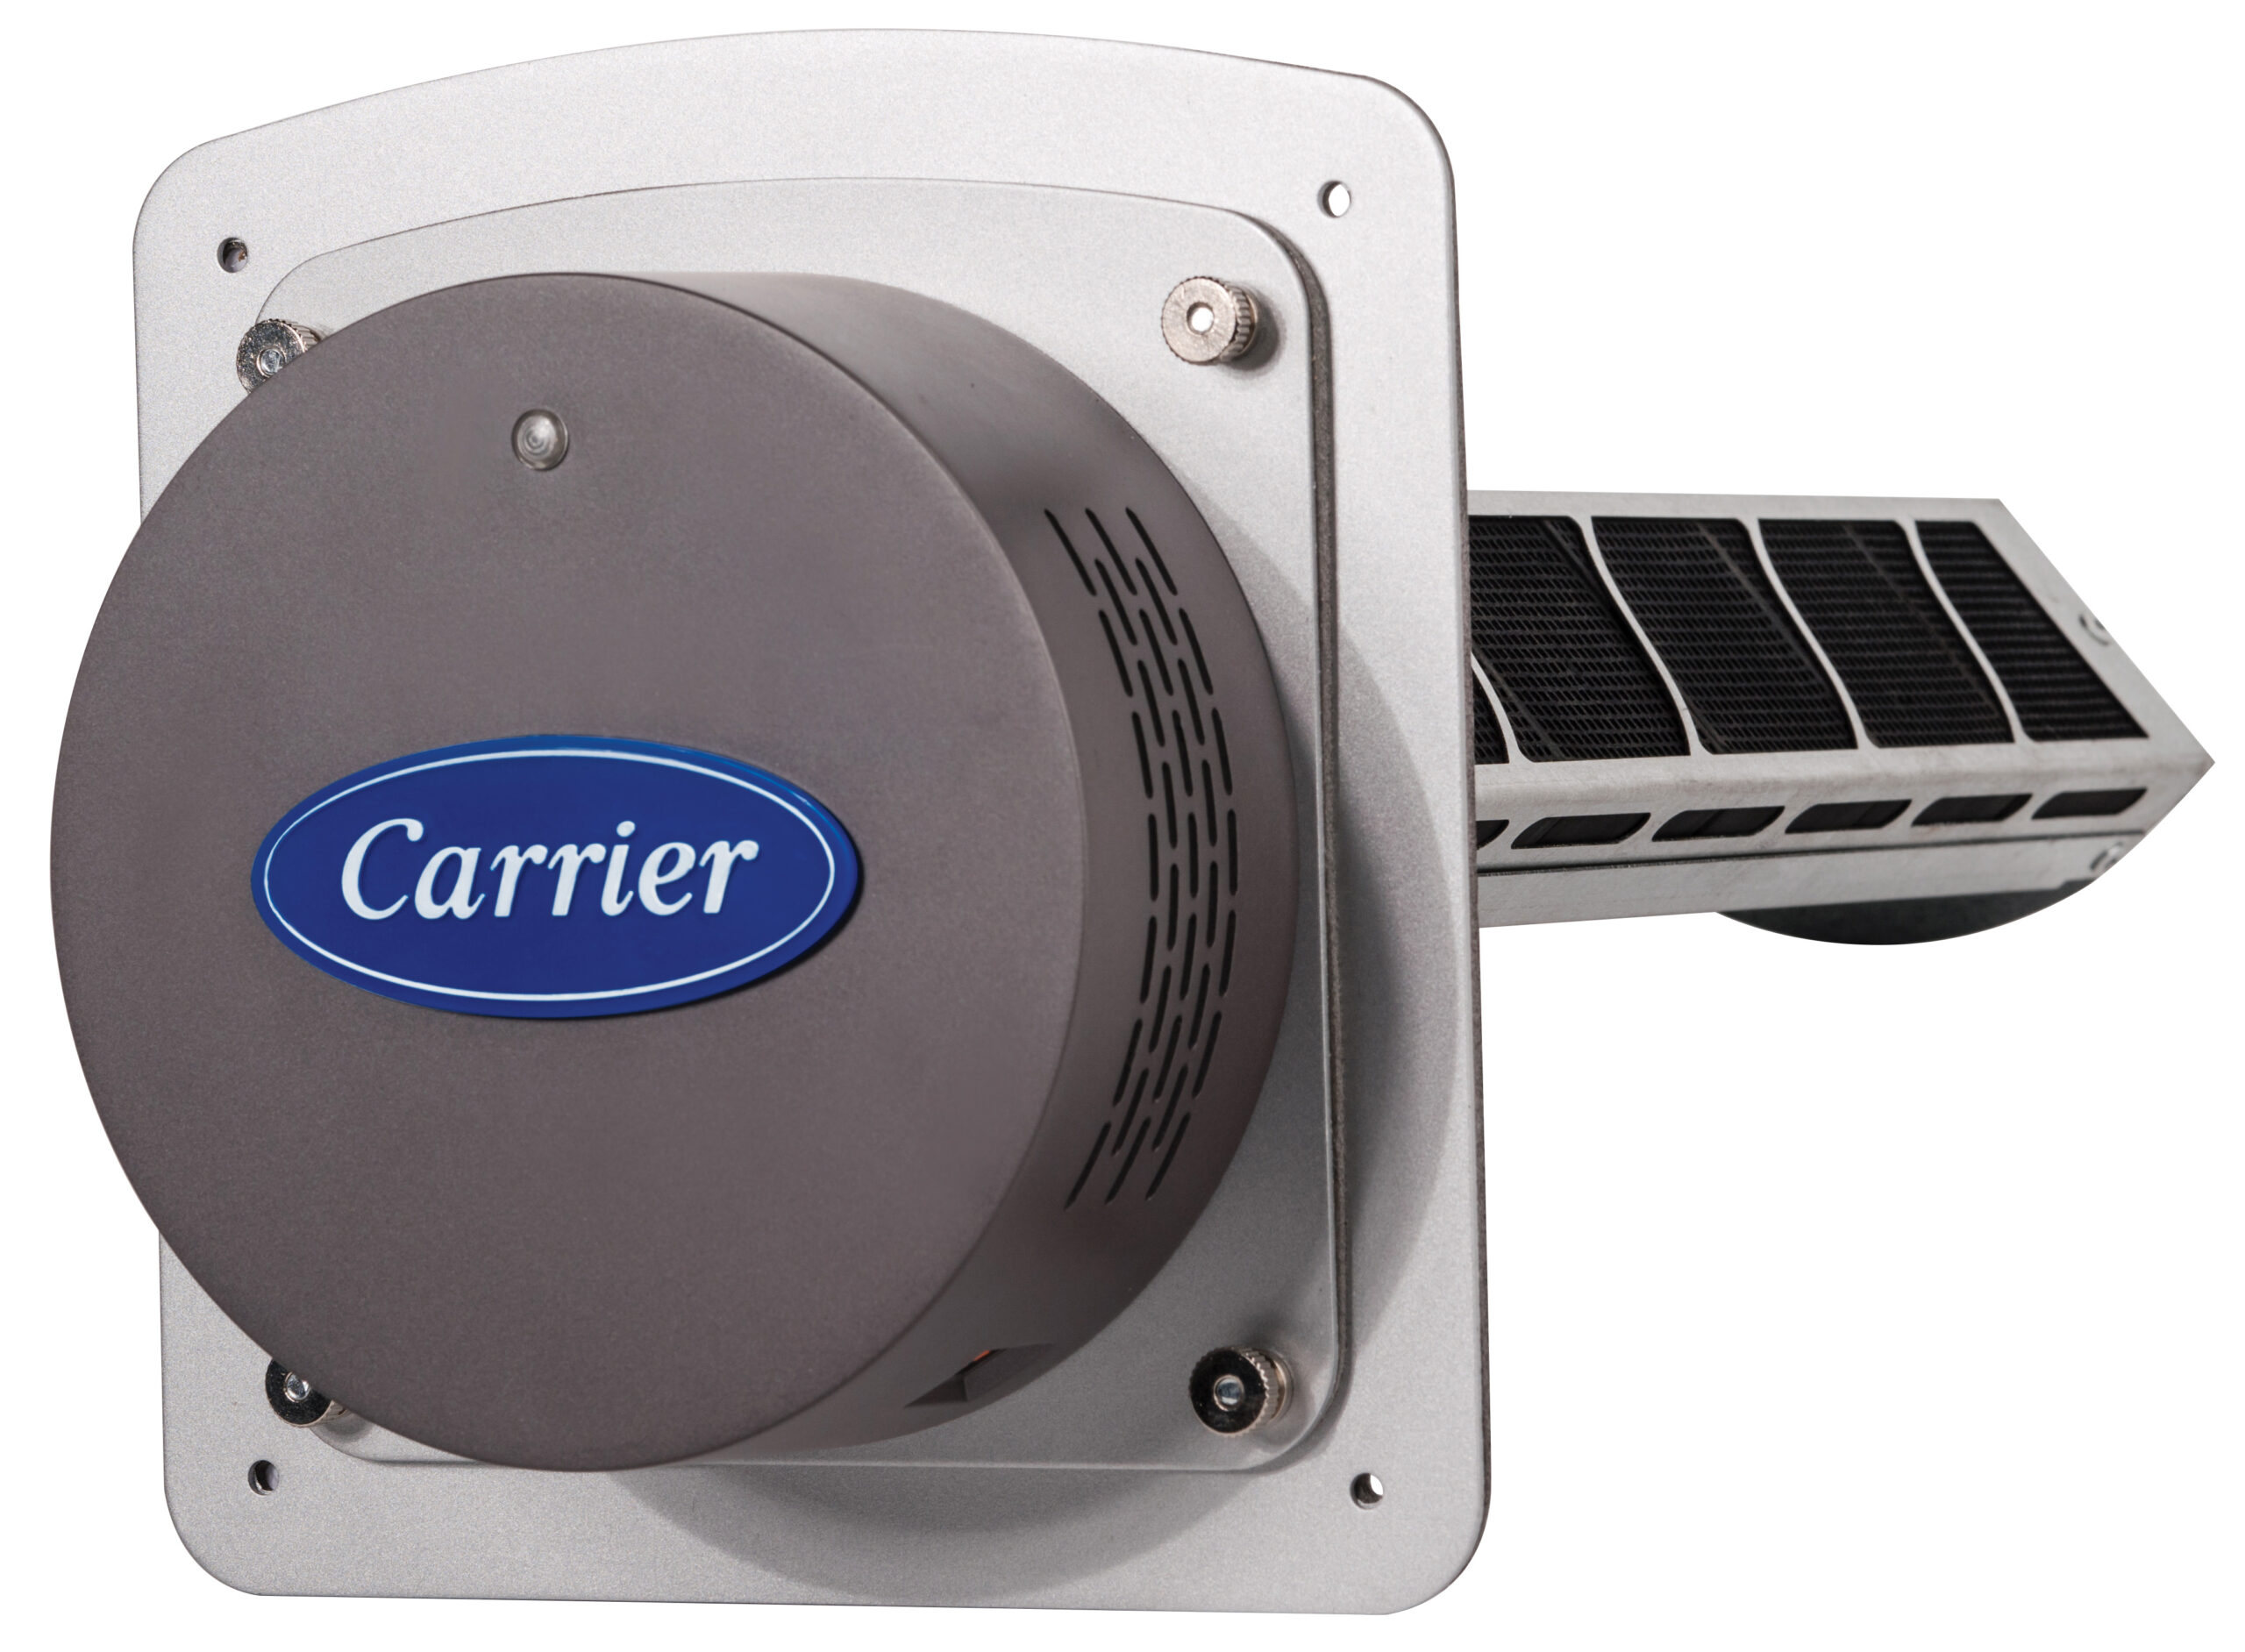 Carrier Launches Carbon Air Purifier with UV to Support Healthier Homes